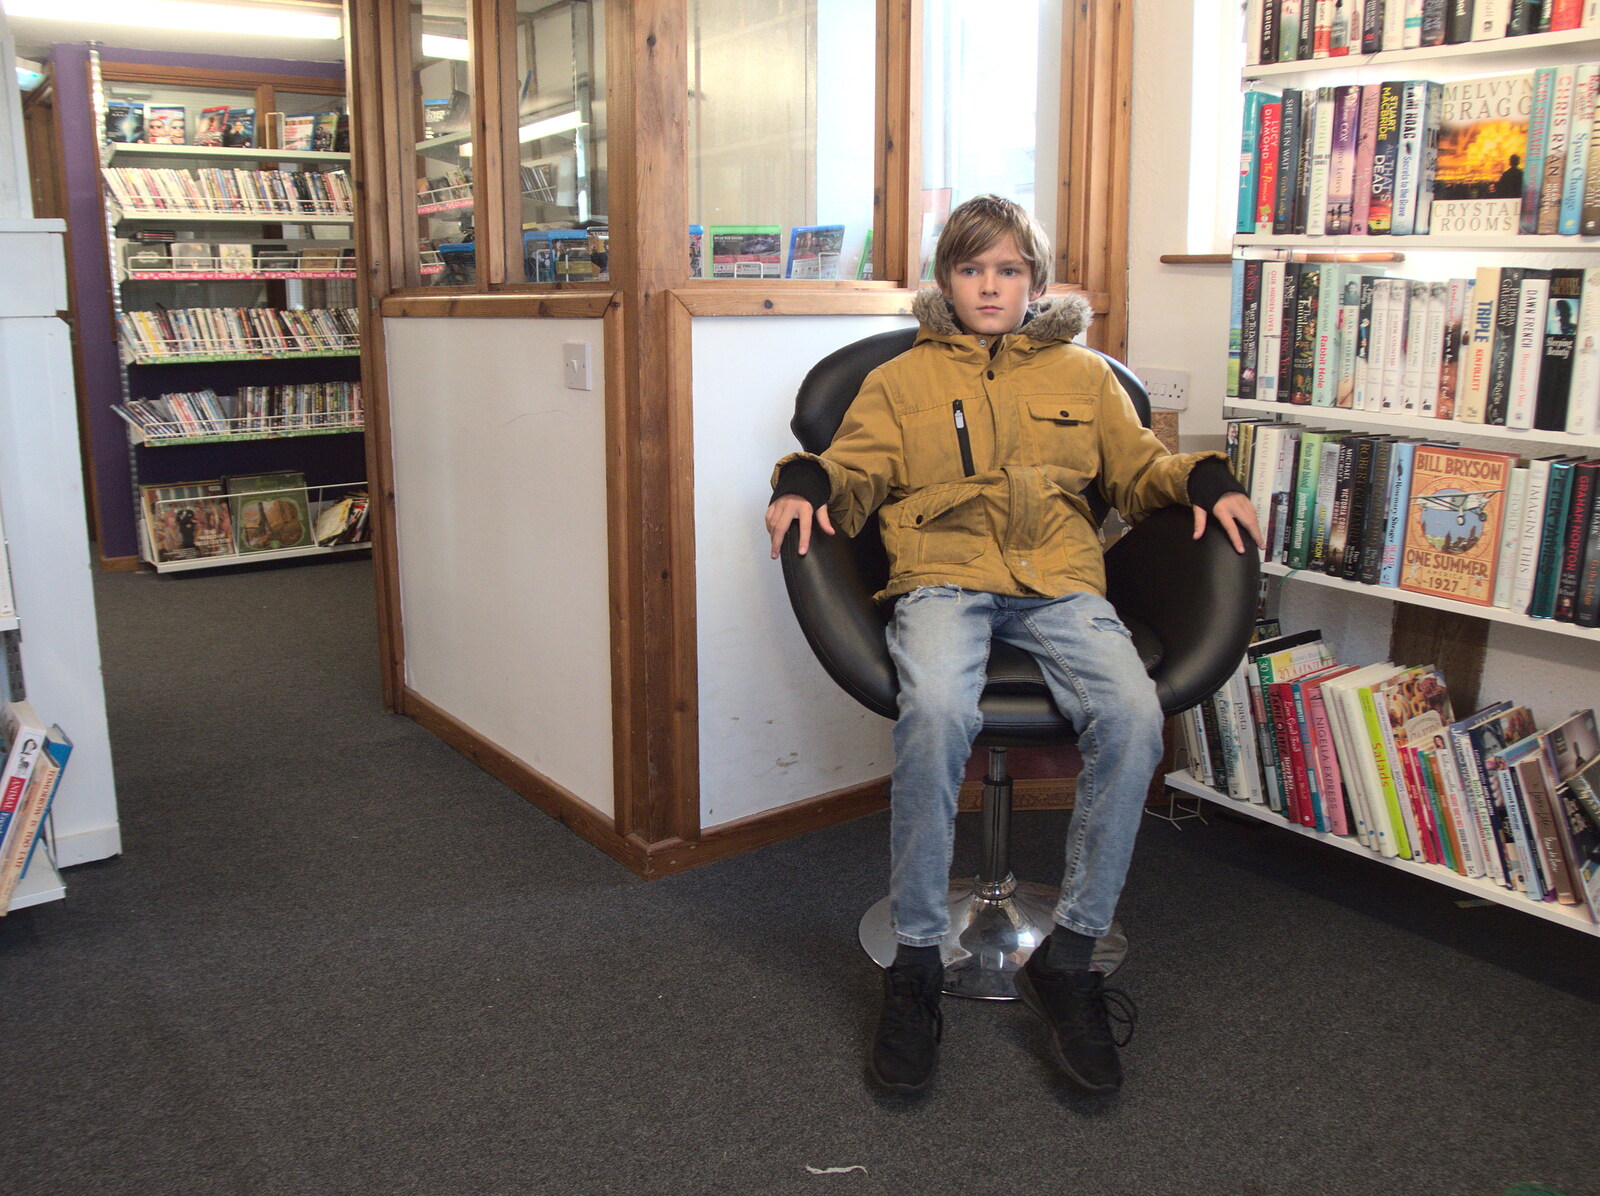 Pizza and Pasta in Bury St. Edmunds, Suffolk - 30th October 2022: Harry takes a seat in the charity shop library